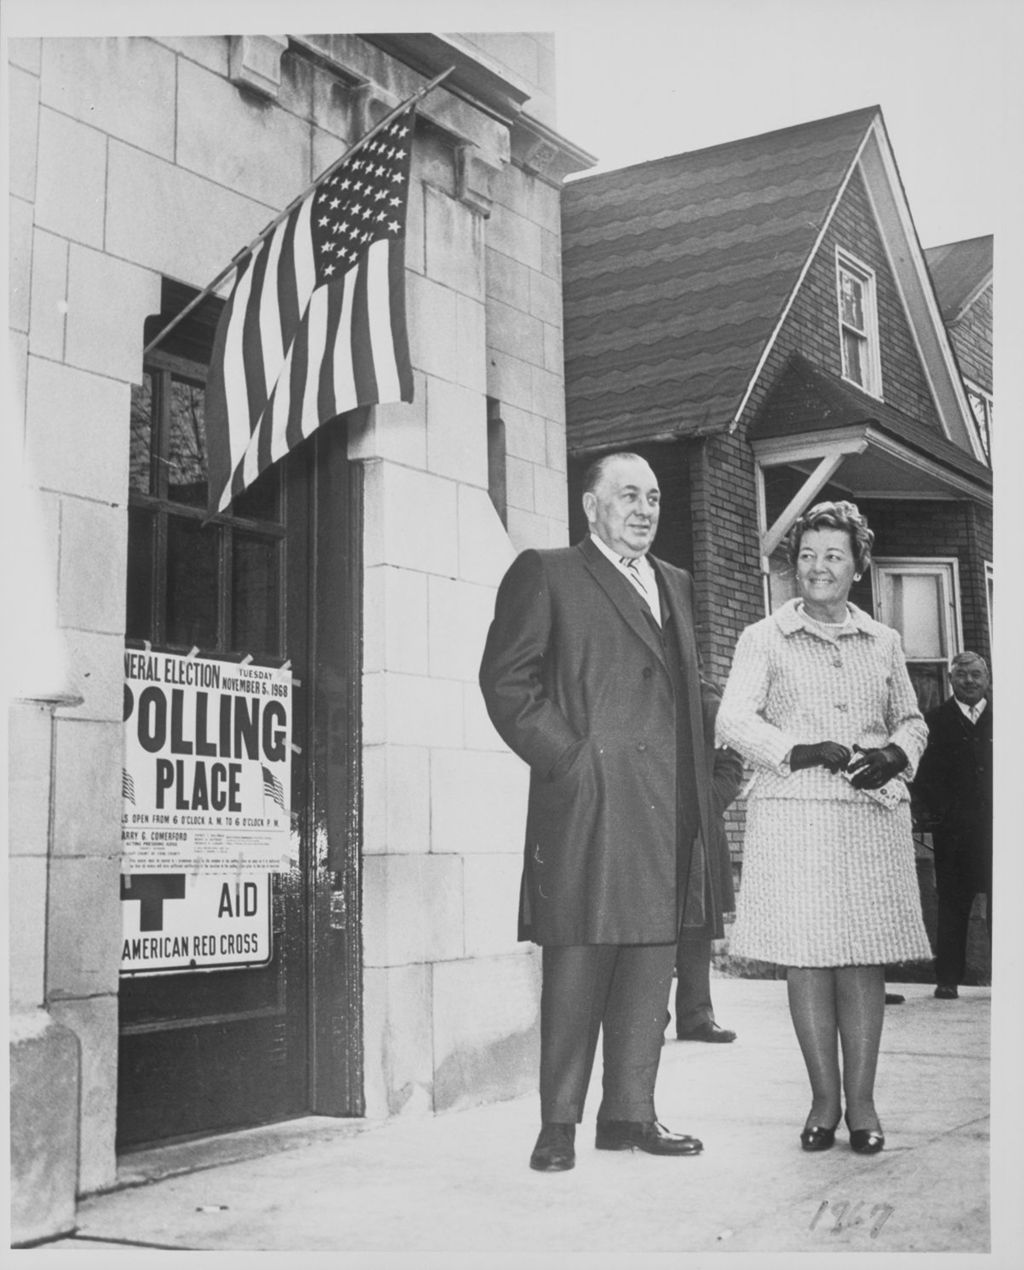 Miniature of Richard J. and Eleanor Daley outside their neighborhood polling place